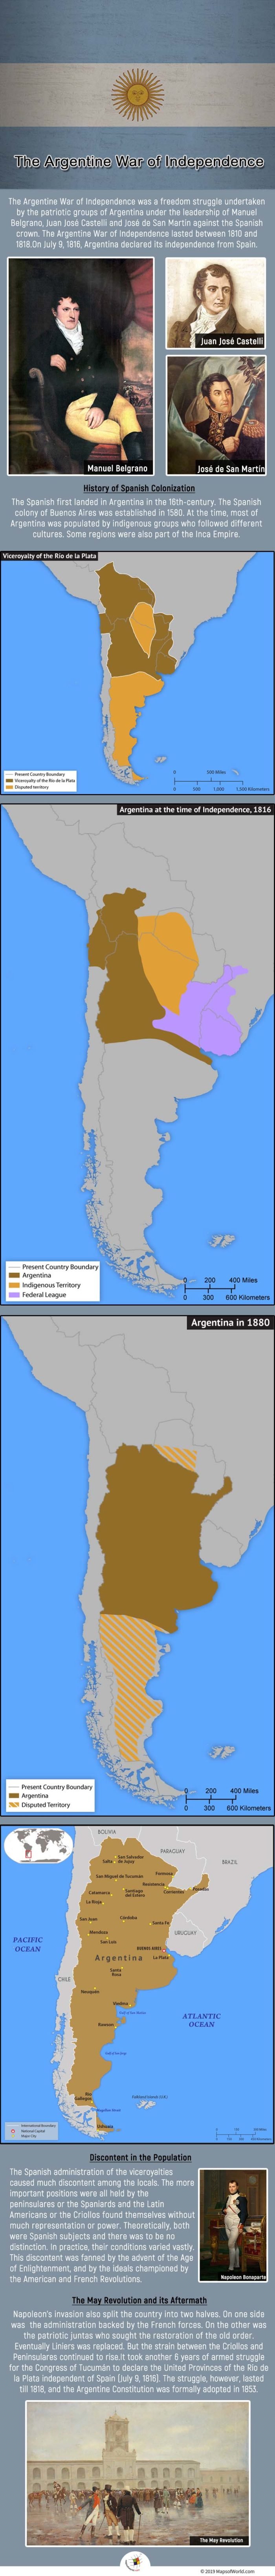 he Argentine War of Independence lasted between 1810 and 1818